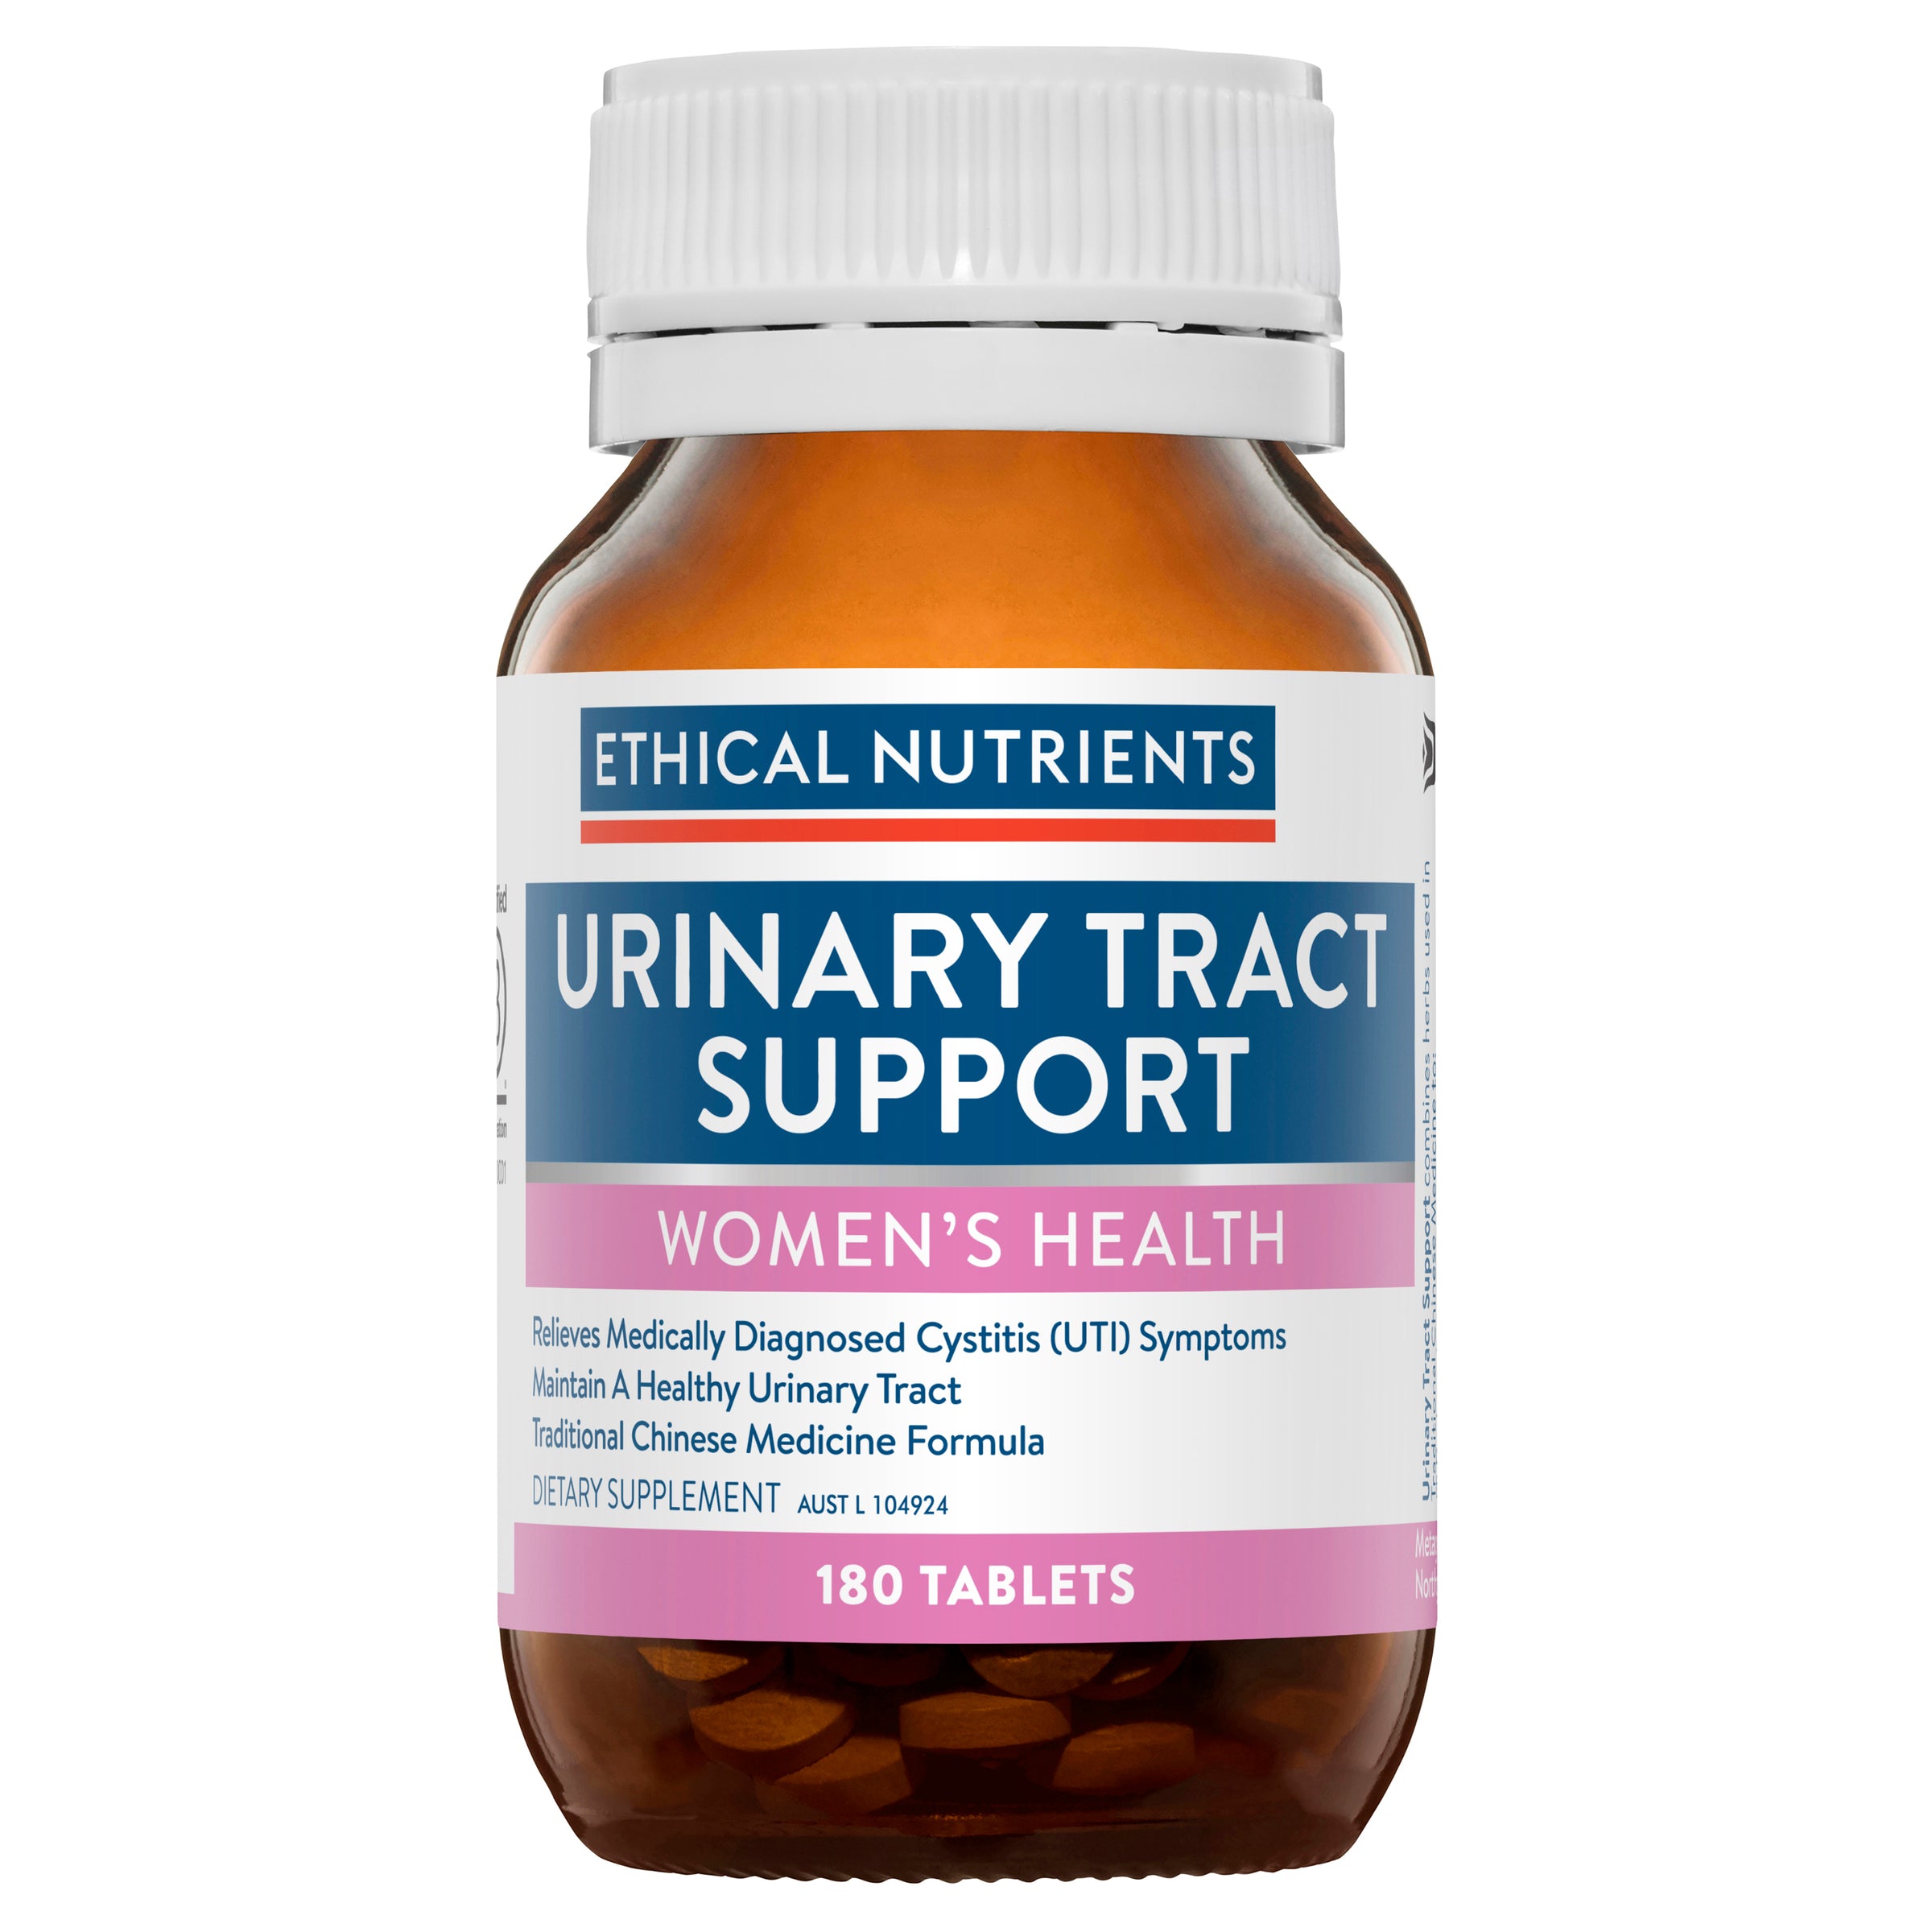 Ethical Nutrients Urinary Tract Support 180 Tablets #size_180 tablets